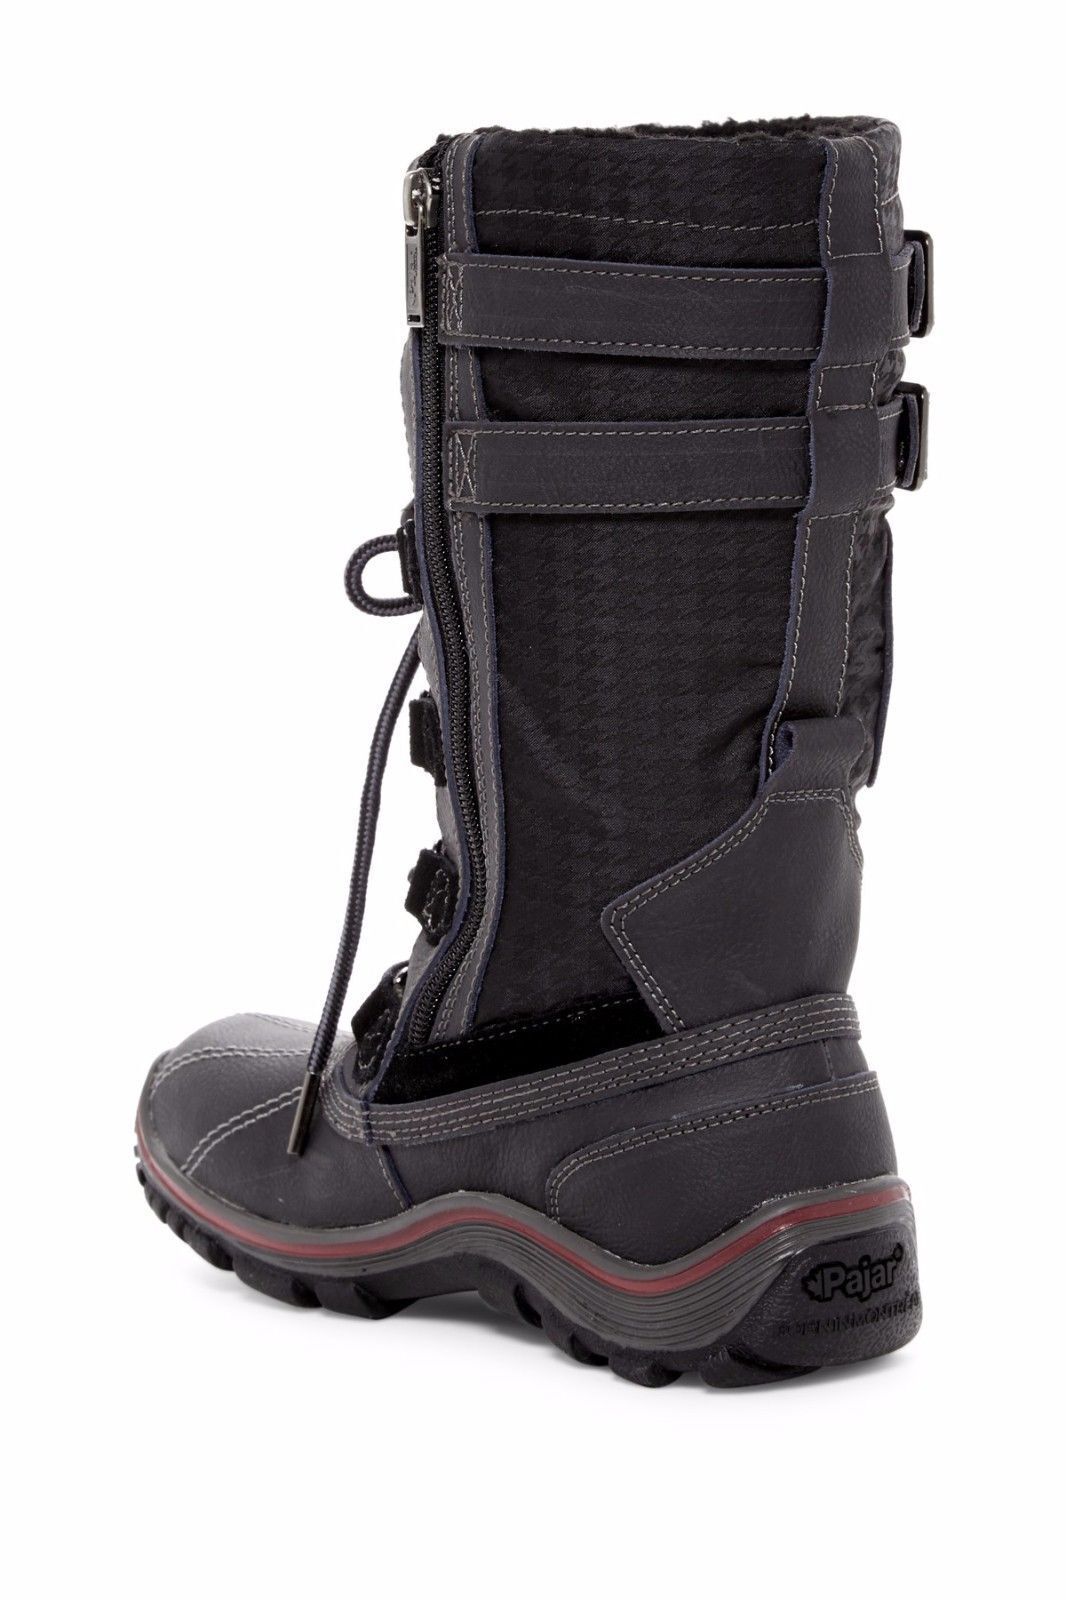 Side view of a Pajar Adriana Women's Winter Snow Waterproof Black Boot with zippers and lacing, isolated on a white background.